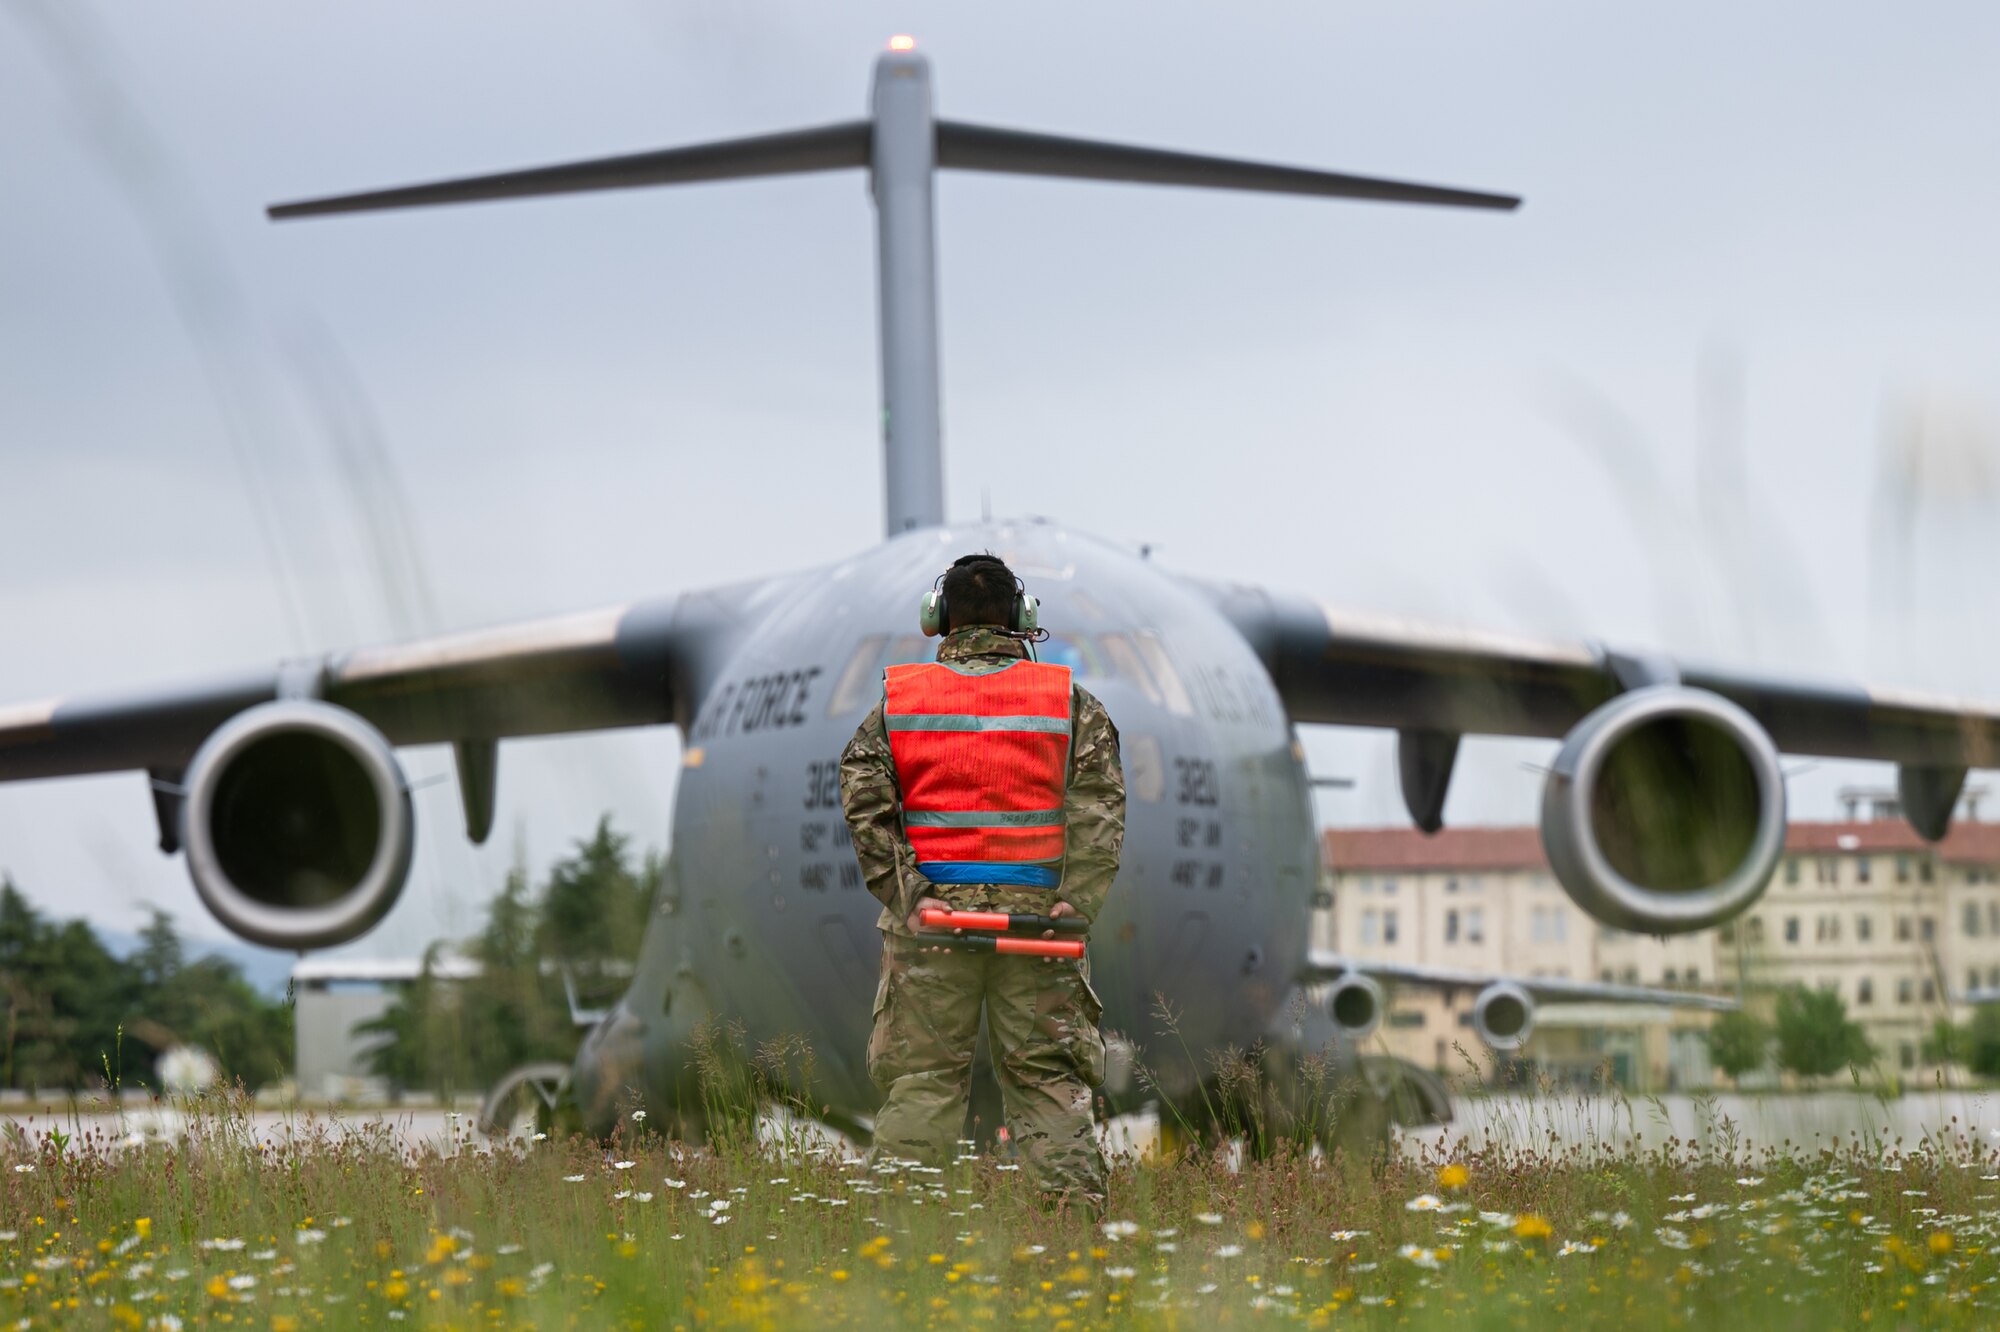 Staff Sgt. Billy Jean Meyer, an avionics specialist from the 725th Air Mobility Squadron, Naval Station Rota, Spain, marshals a C-17 Globemaster III prior to takeoff from Aviano Air Base, Italy, on May 16, 2023.